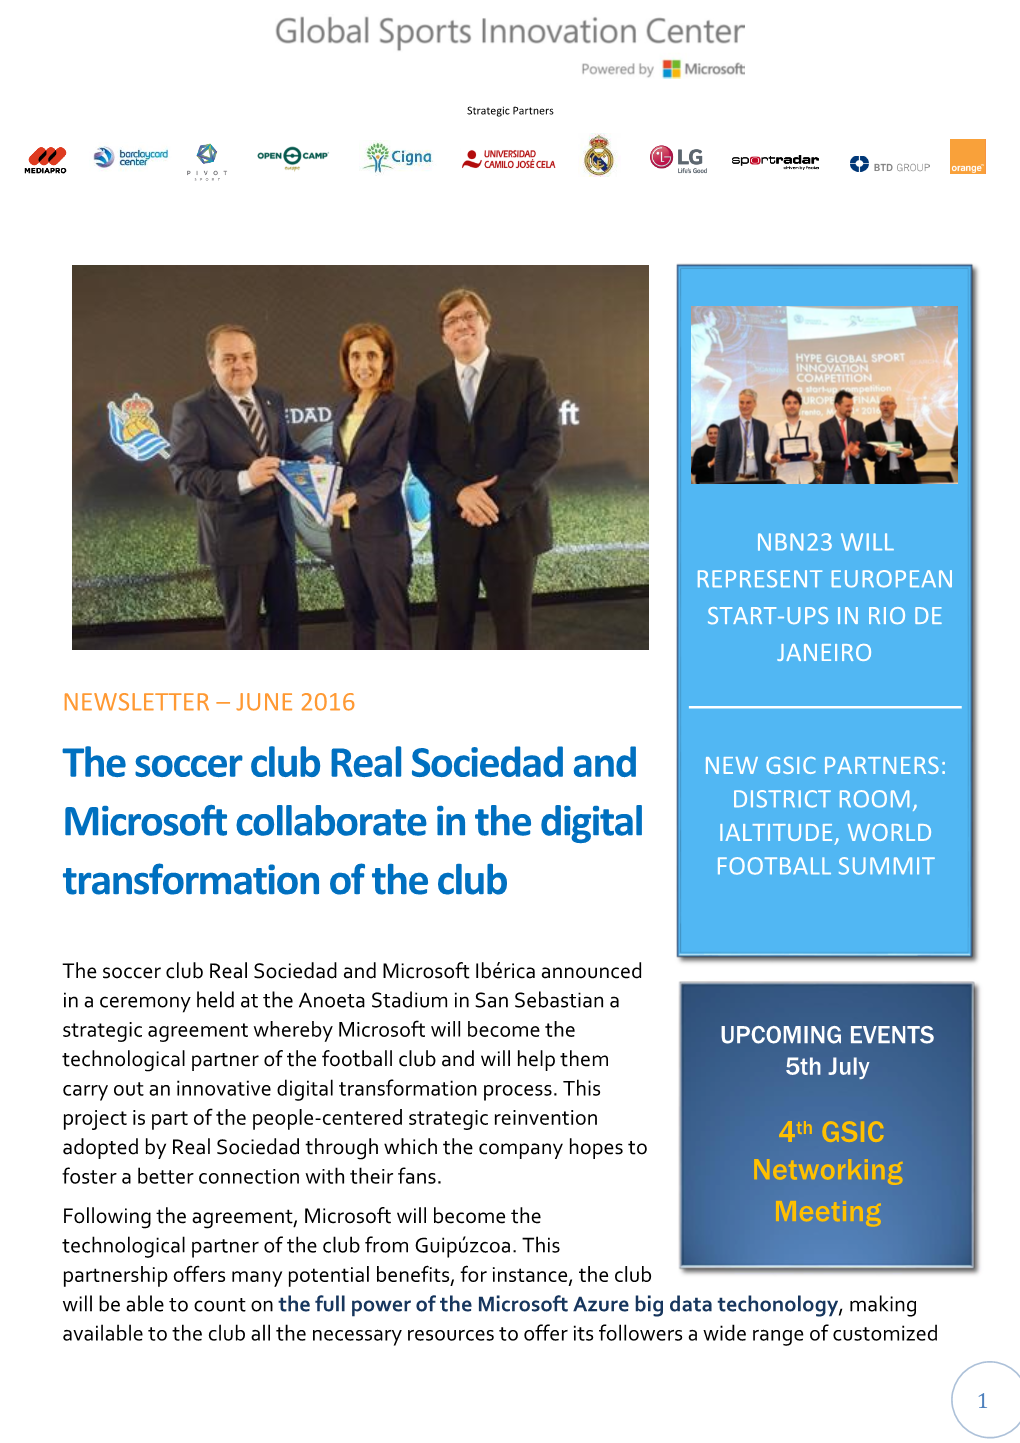 The Soccer Club Real Sociedad and Microsoft Collaborate in the Digital